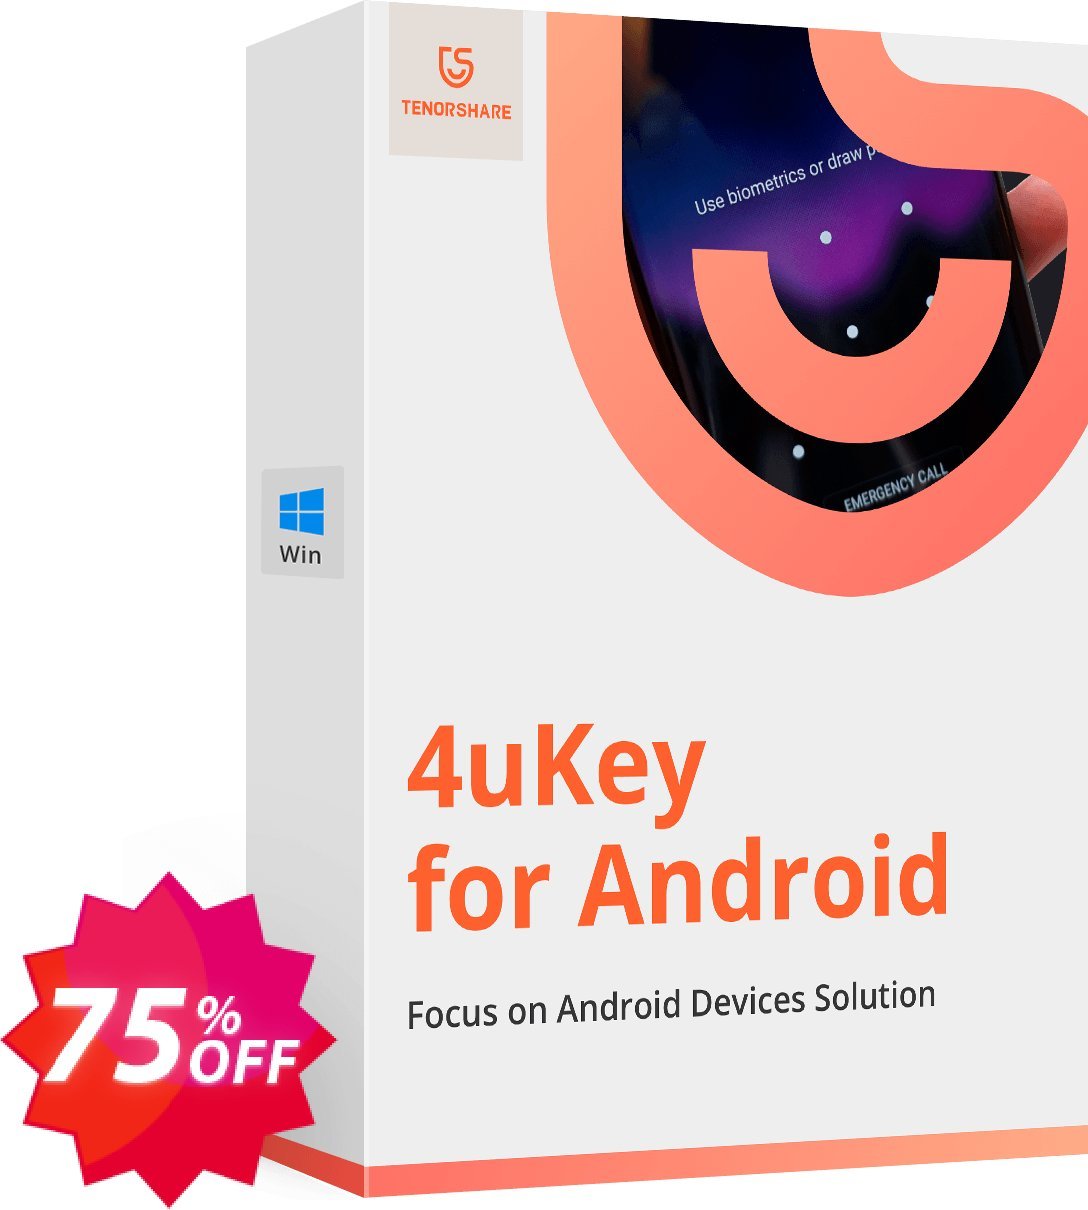 Tenorshare 4uKey for Android, Yearly Plan  Coupon code 75% discount 